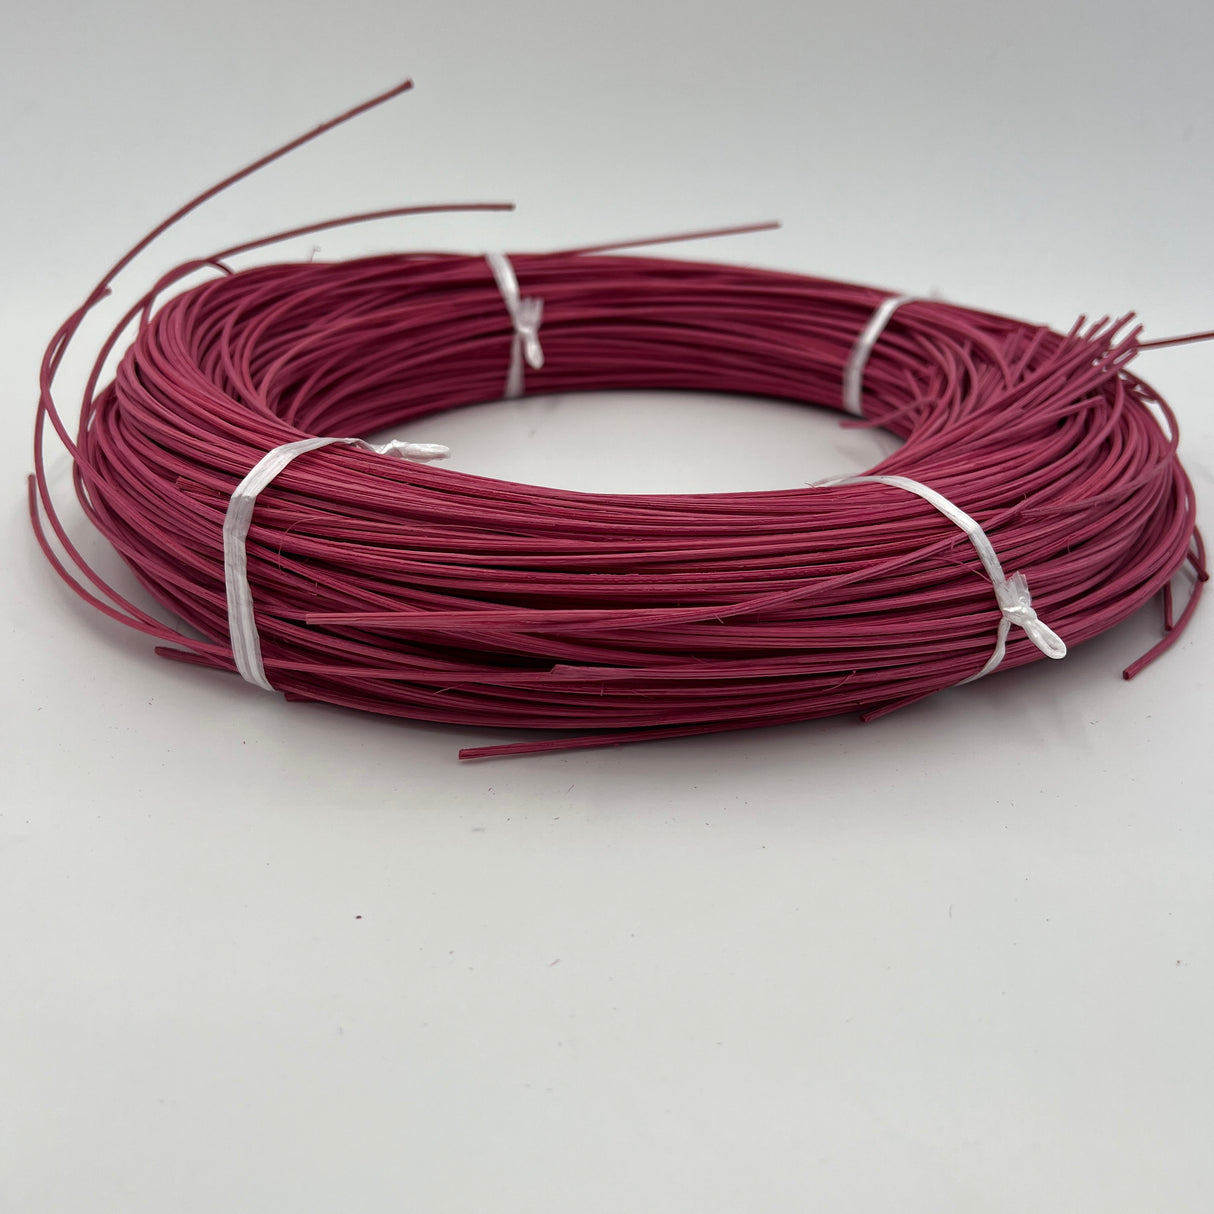 Honeysuckle - #2 Round - Dyed Reed (1/2 lb coil)